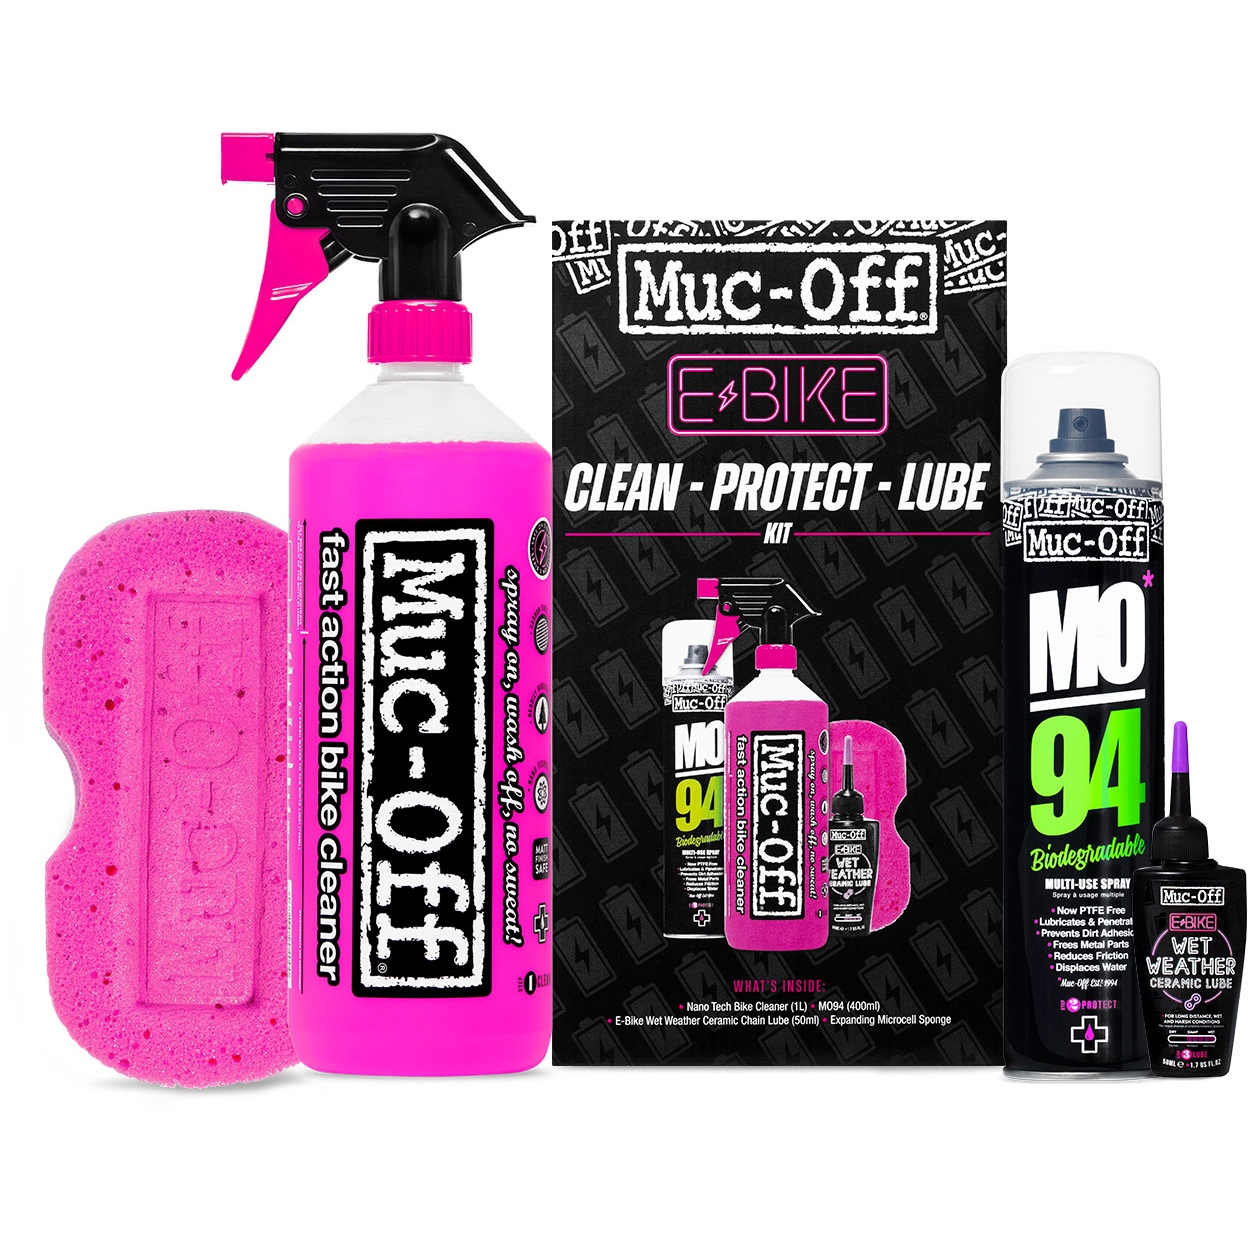 Image of Muc-Off E-Bike Clean - Protect & Lube Kit (Wet Lube Version) - black